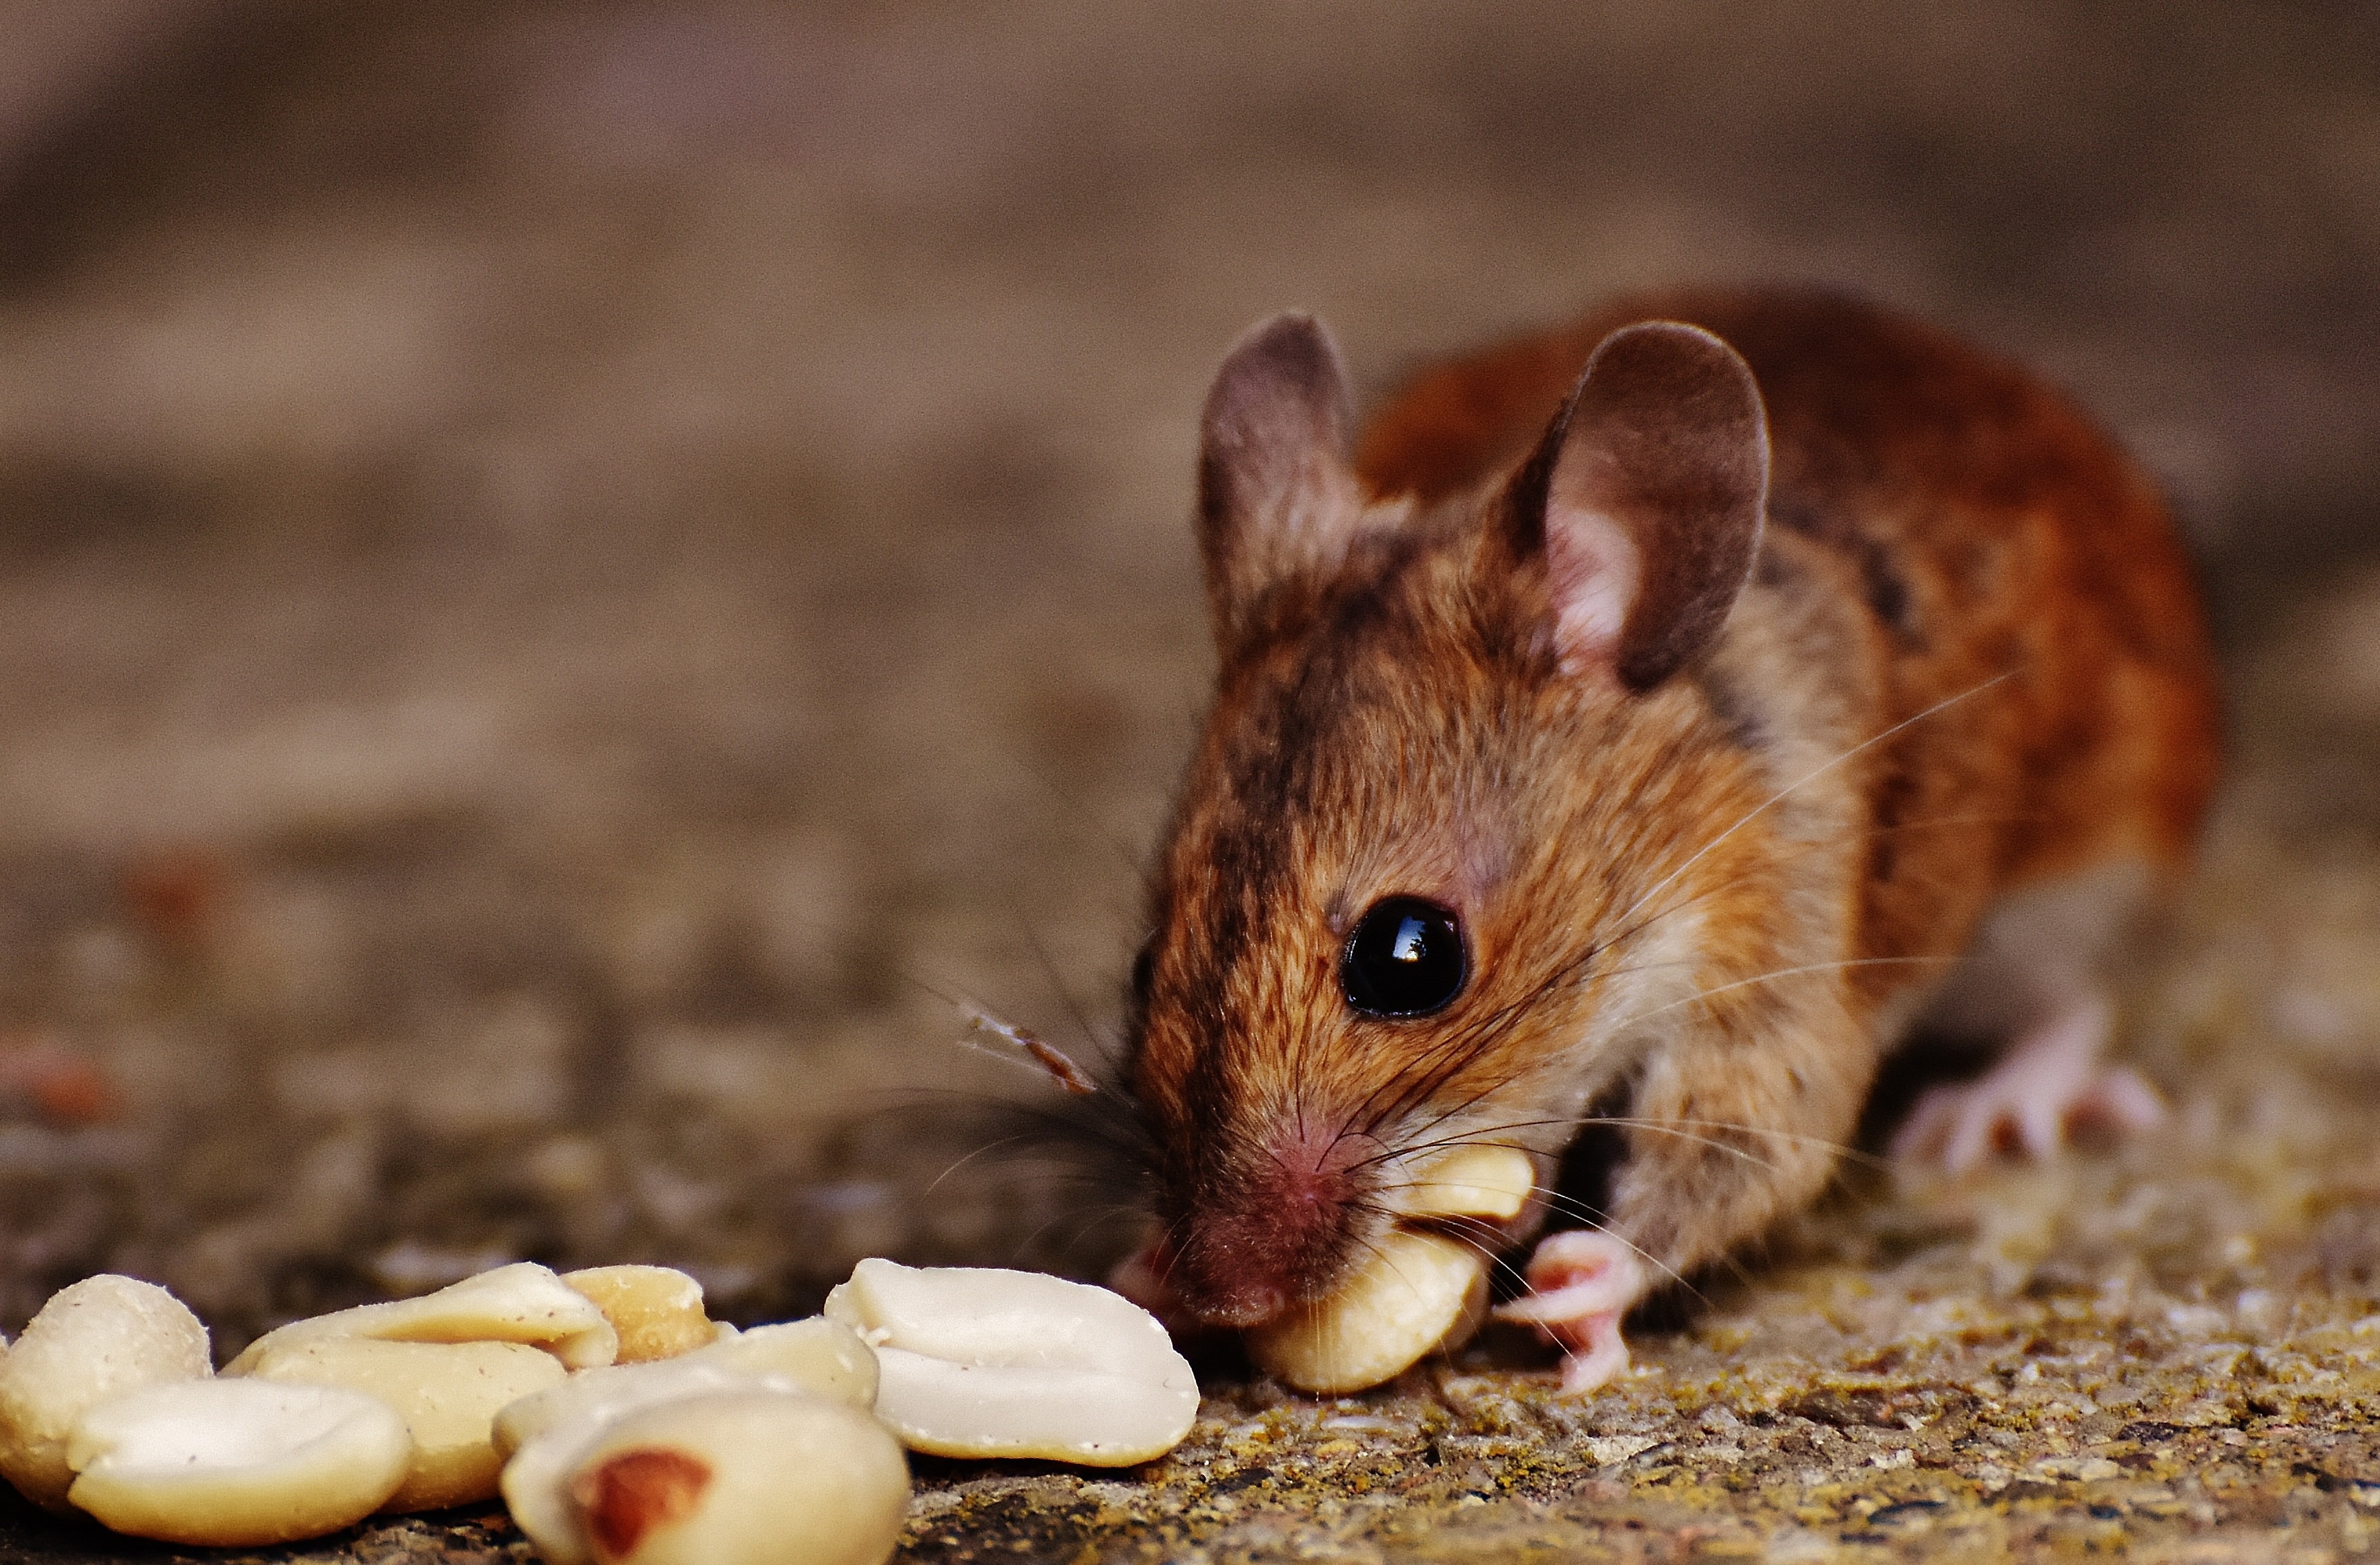 animals, food, nuts, mouse, rodent, european mouse QHD